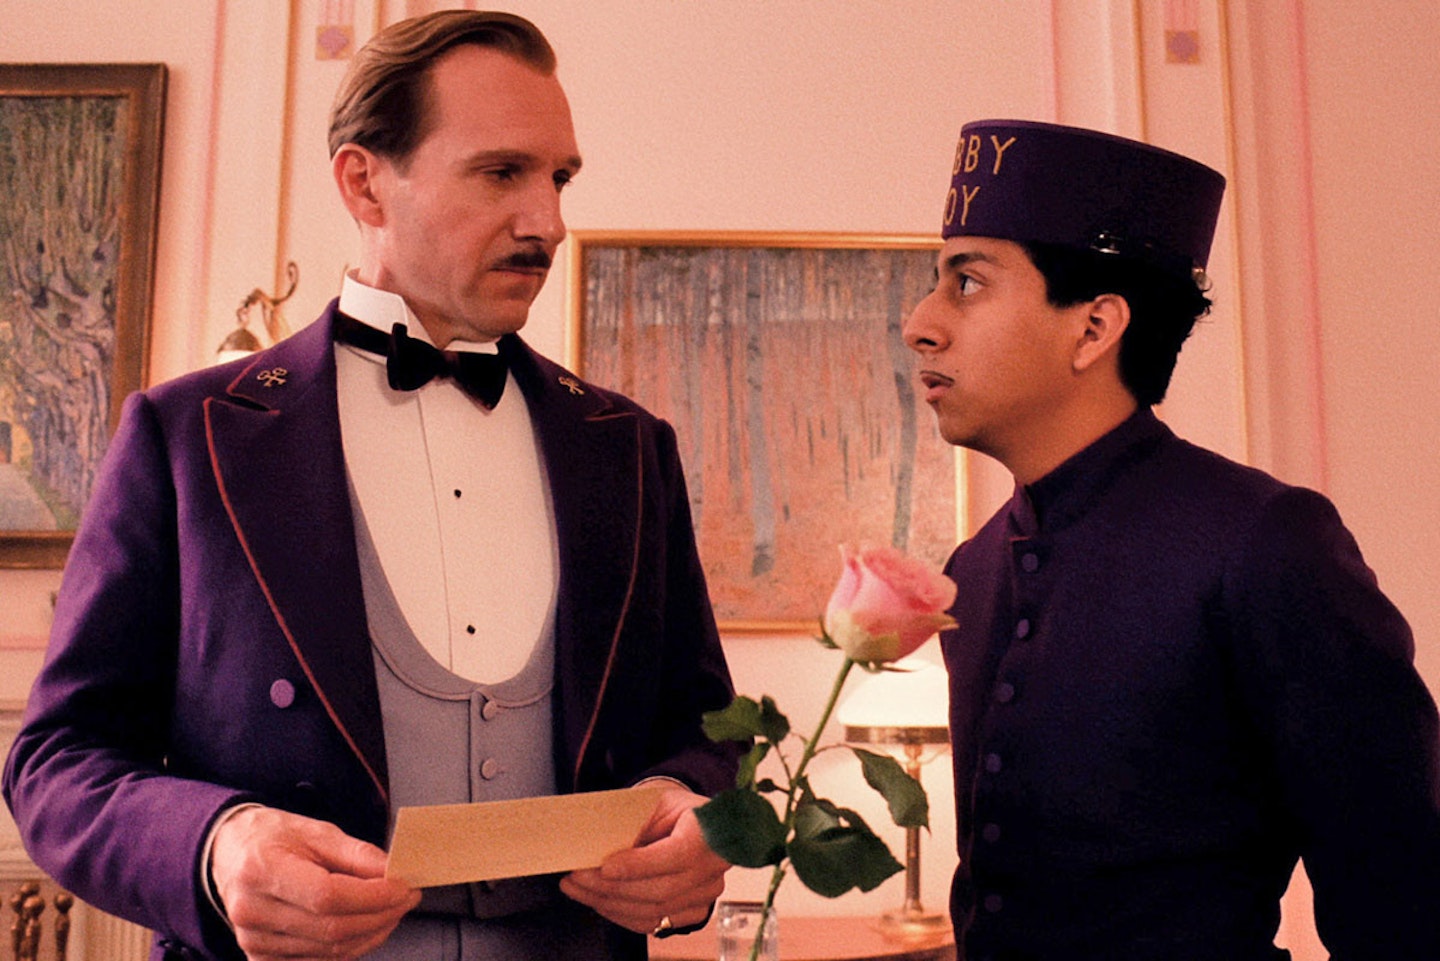 The Grand Budapest Hotel is up for 11 awards